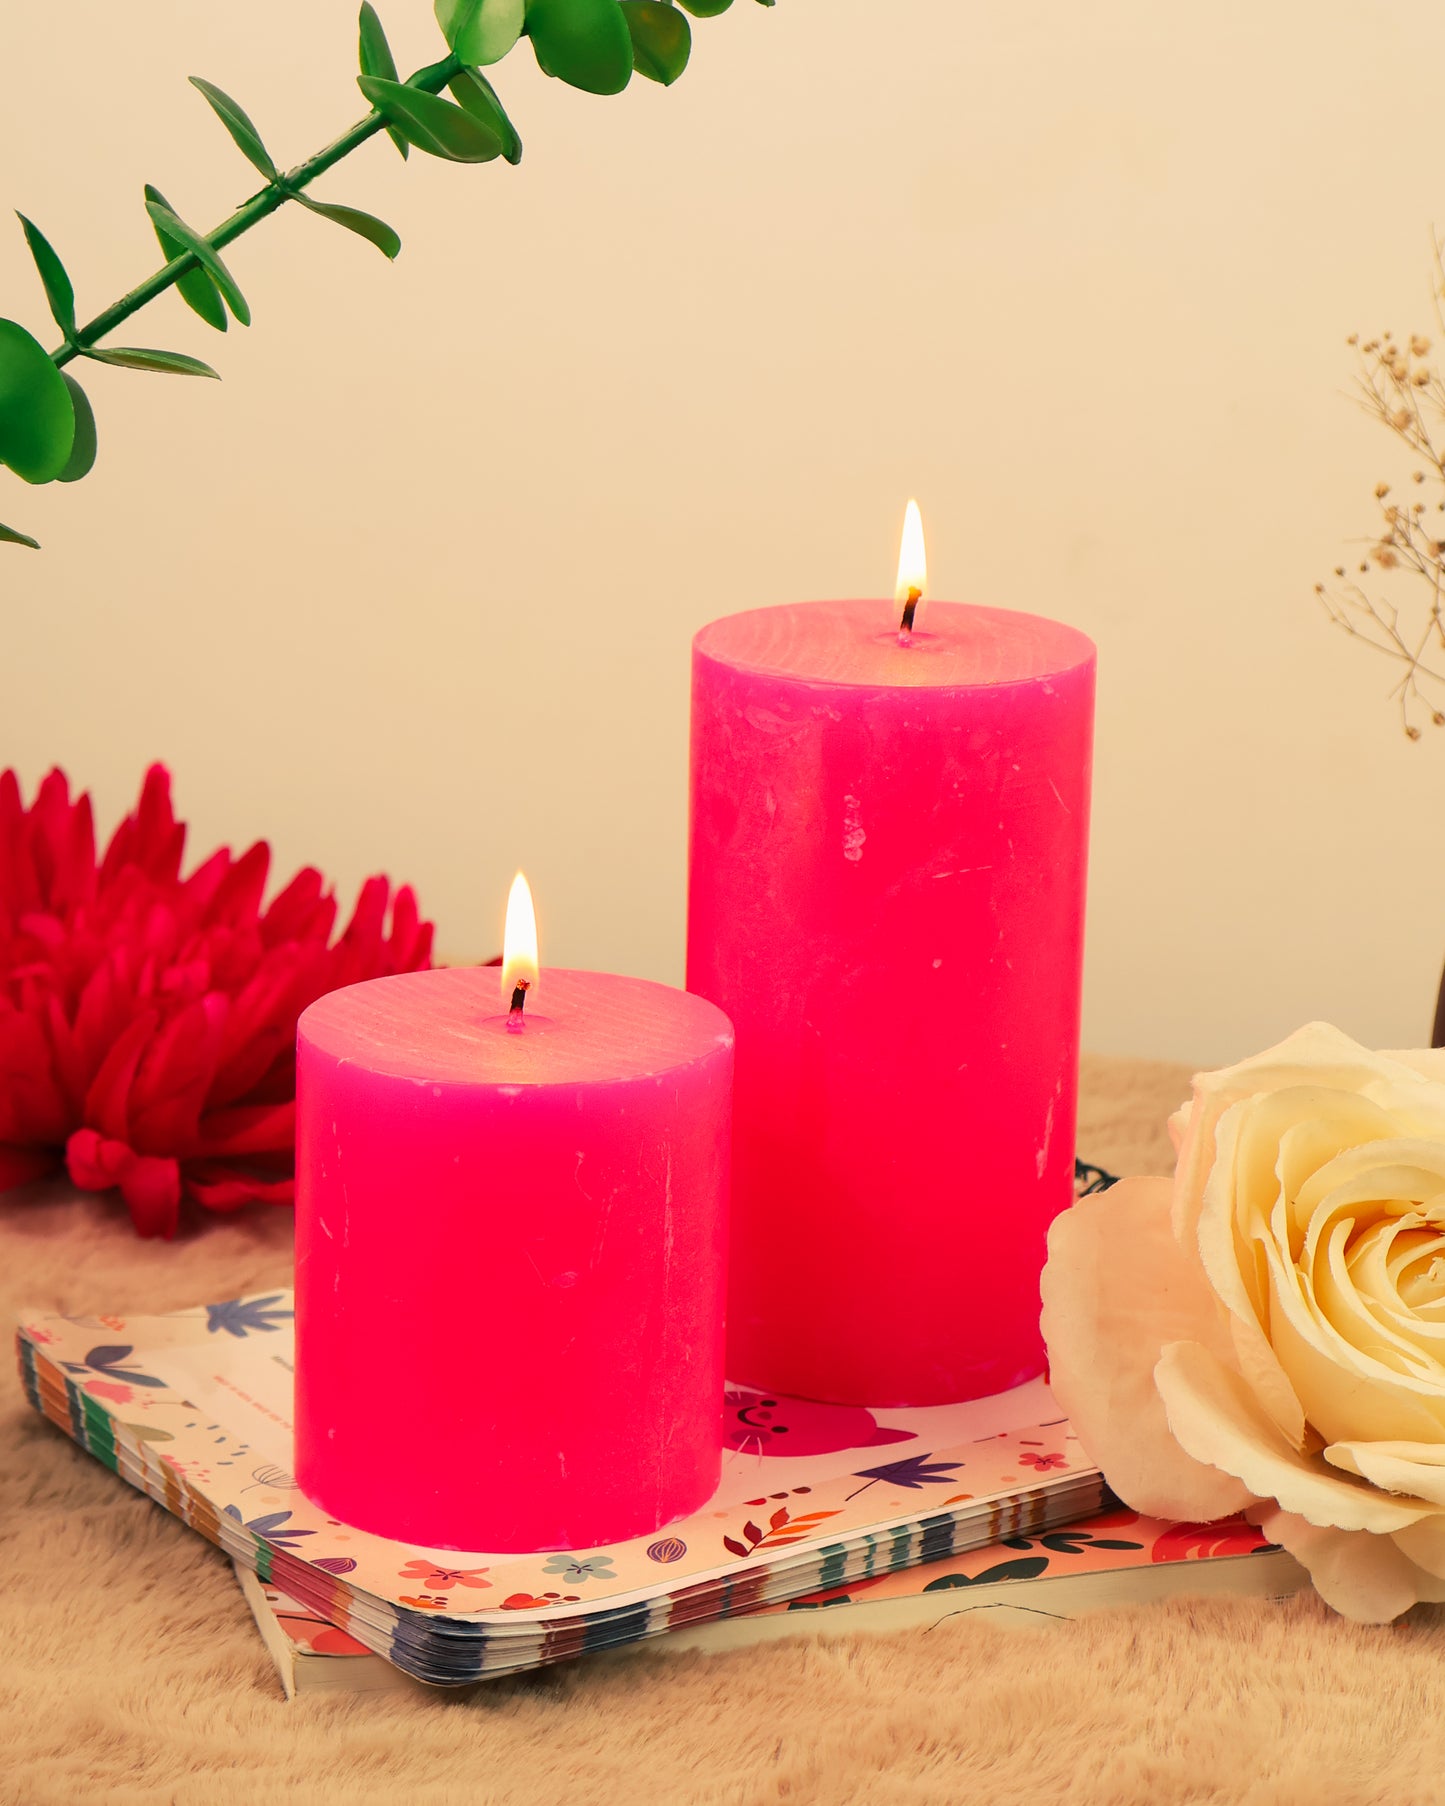 Fragrance Pillar Candle Set of 2 (2.75*3, 2.75*5 Inch) | Home Decor Candle | Scented Pillar Candle|